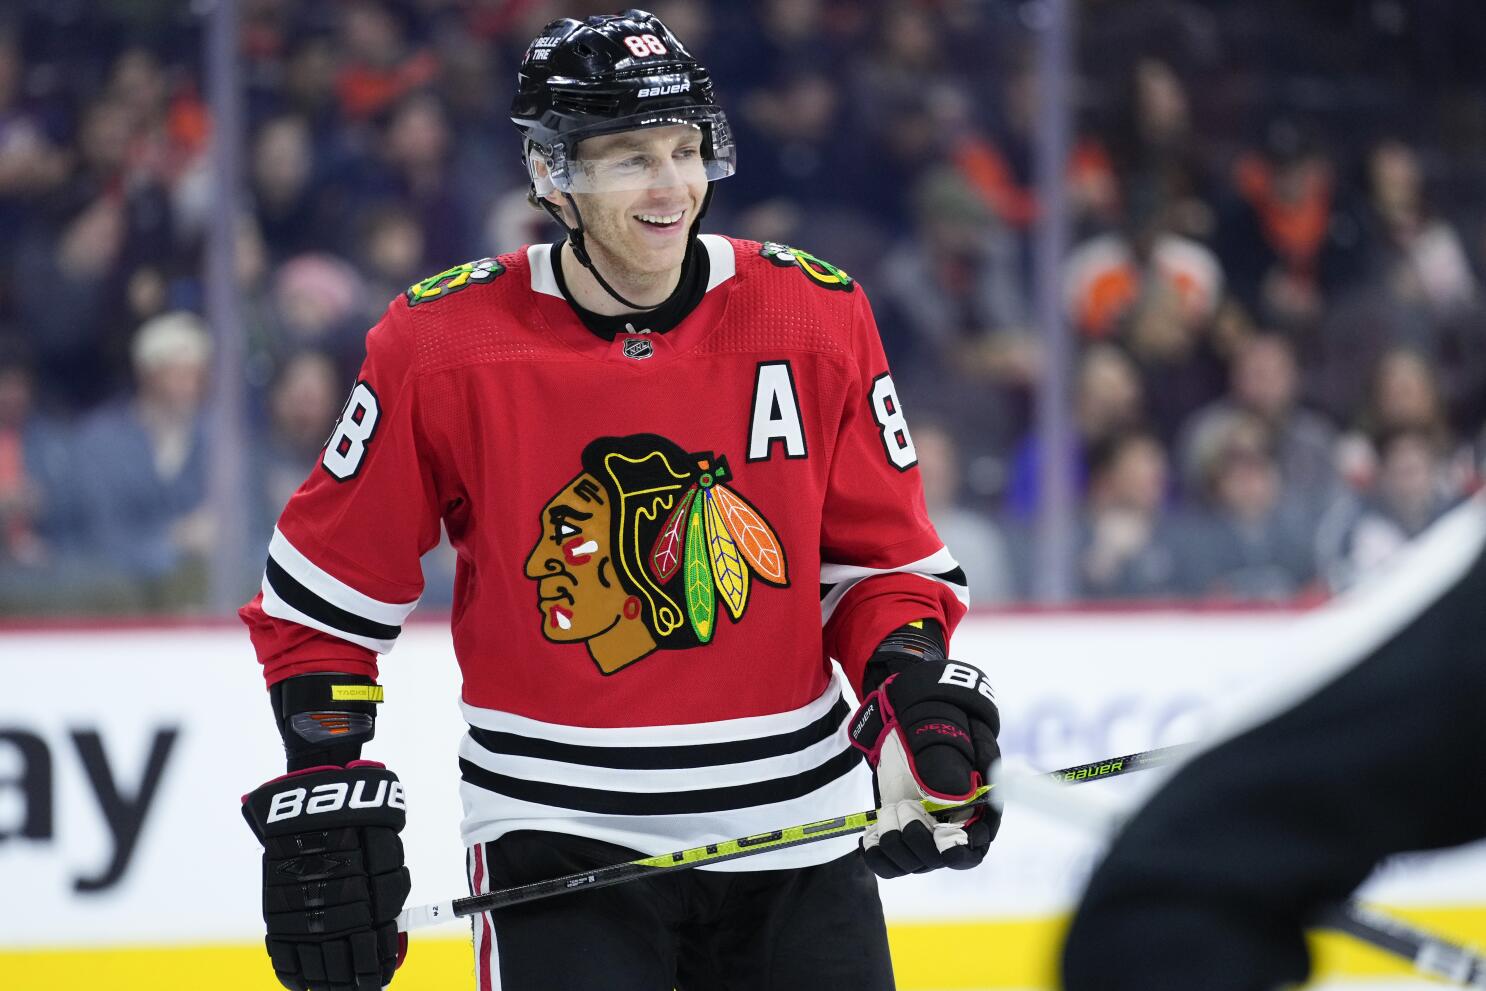 Chicago Blackhawks Gift Guide: 10 must-have Jonathan Toews items